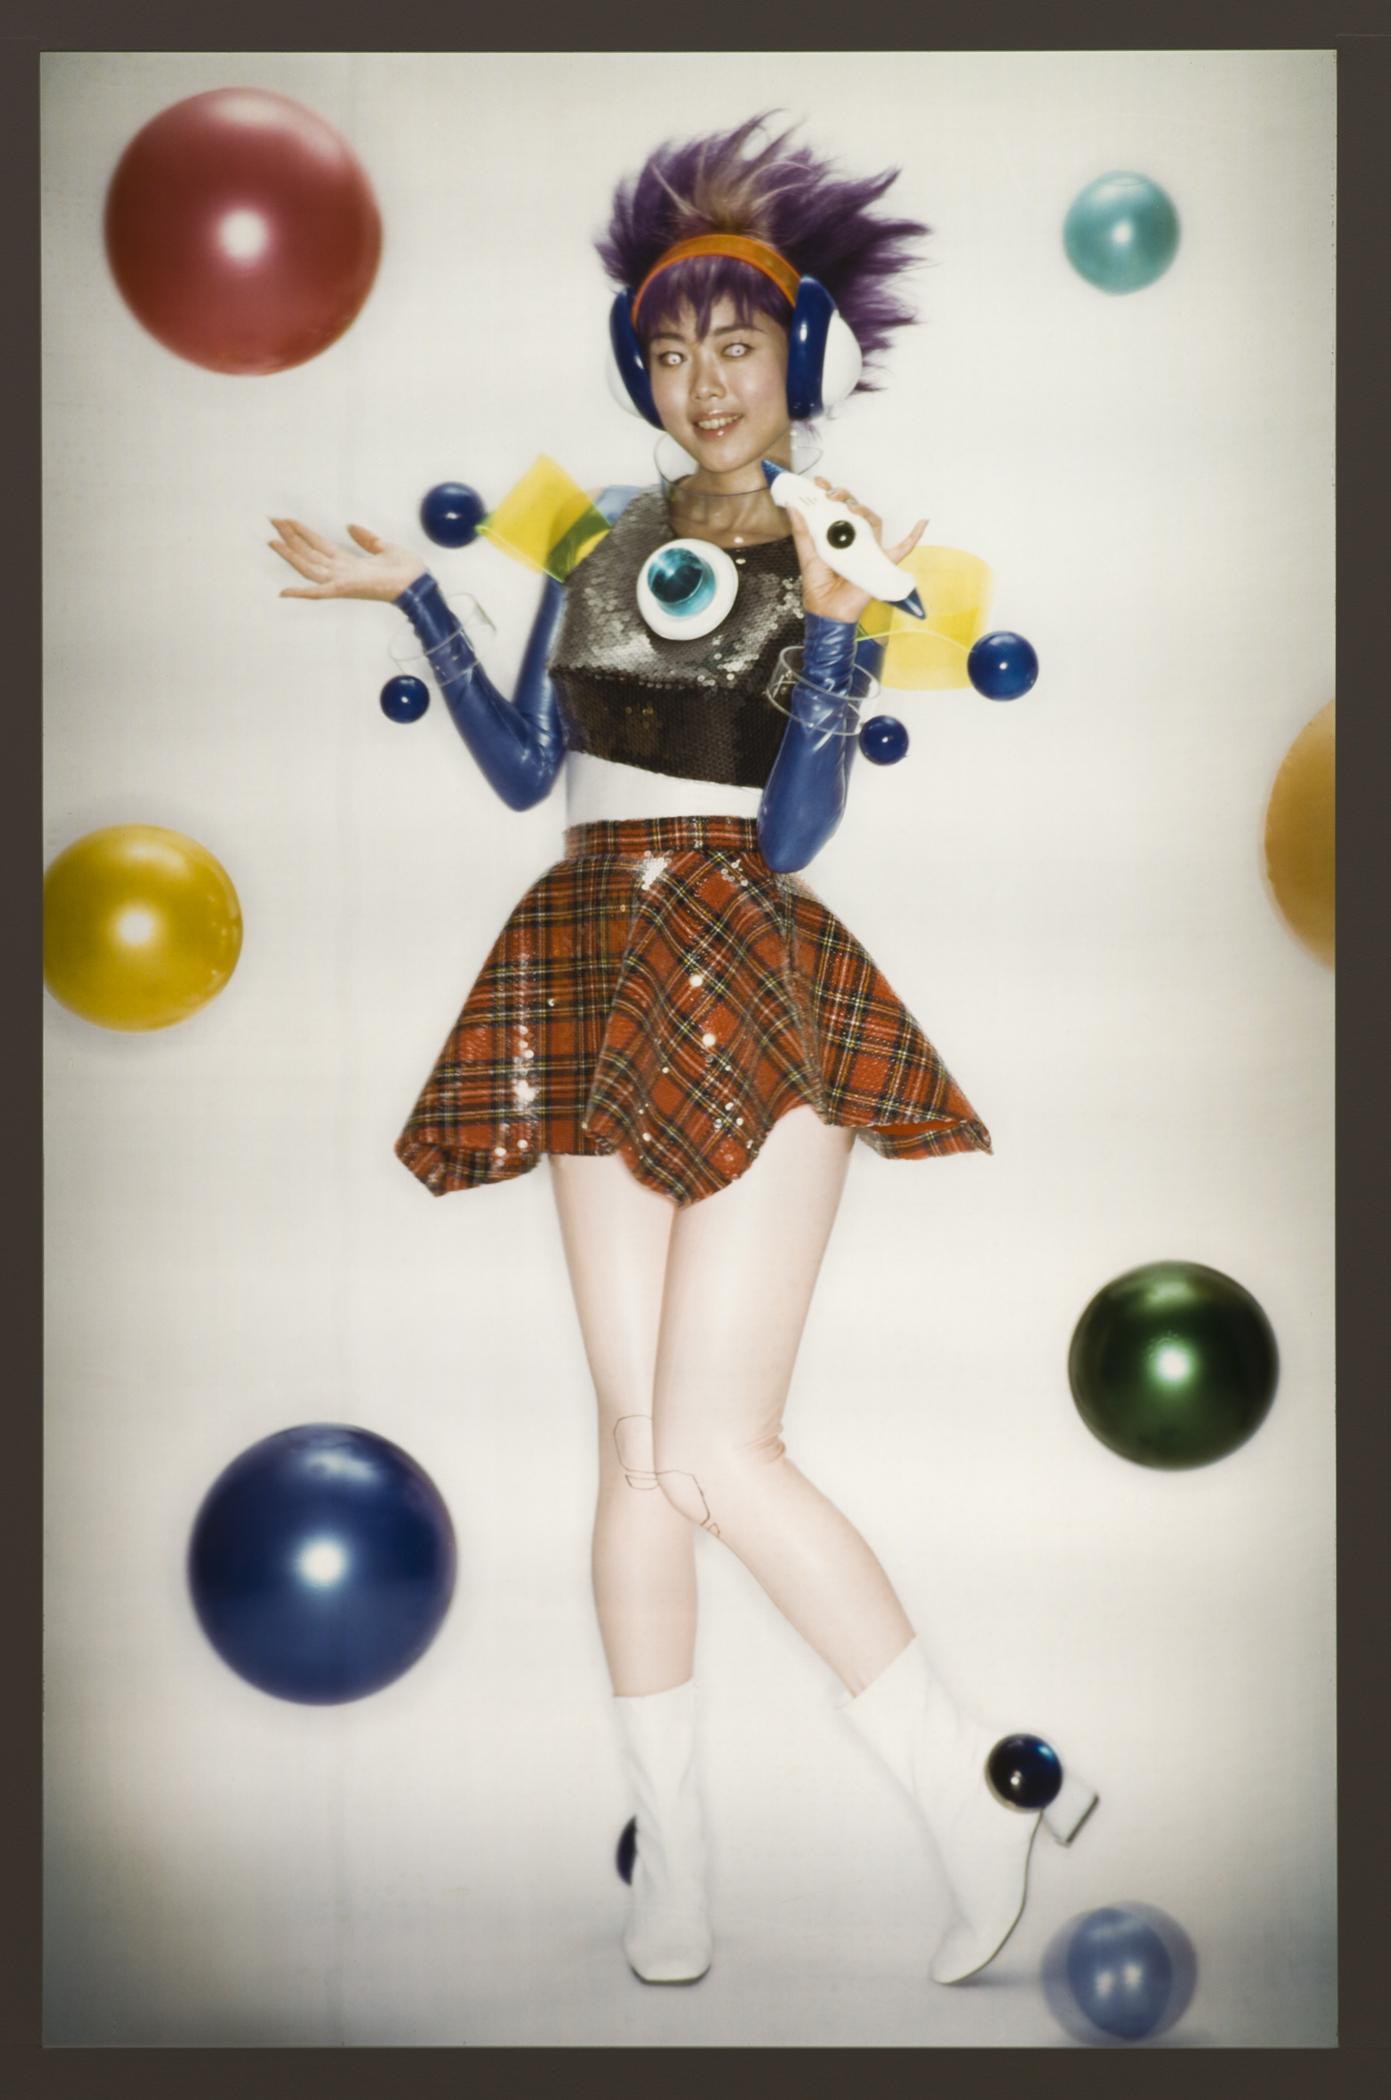 A futuristic person wearing a brightly colored crop top and a skirt poses in between thirteen colorful spheres.